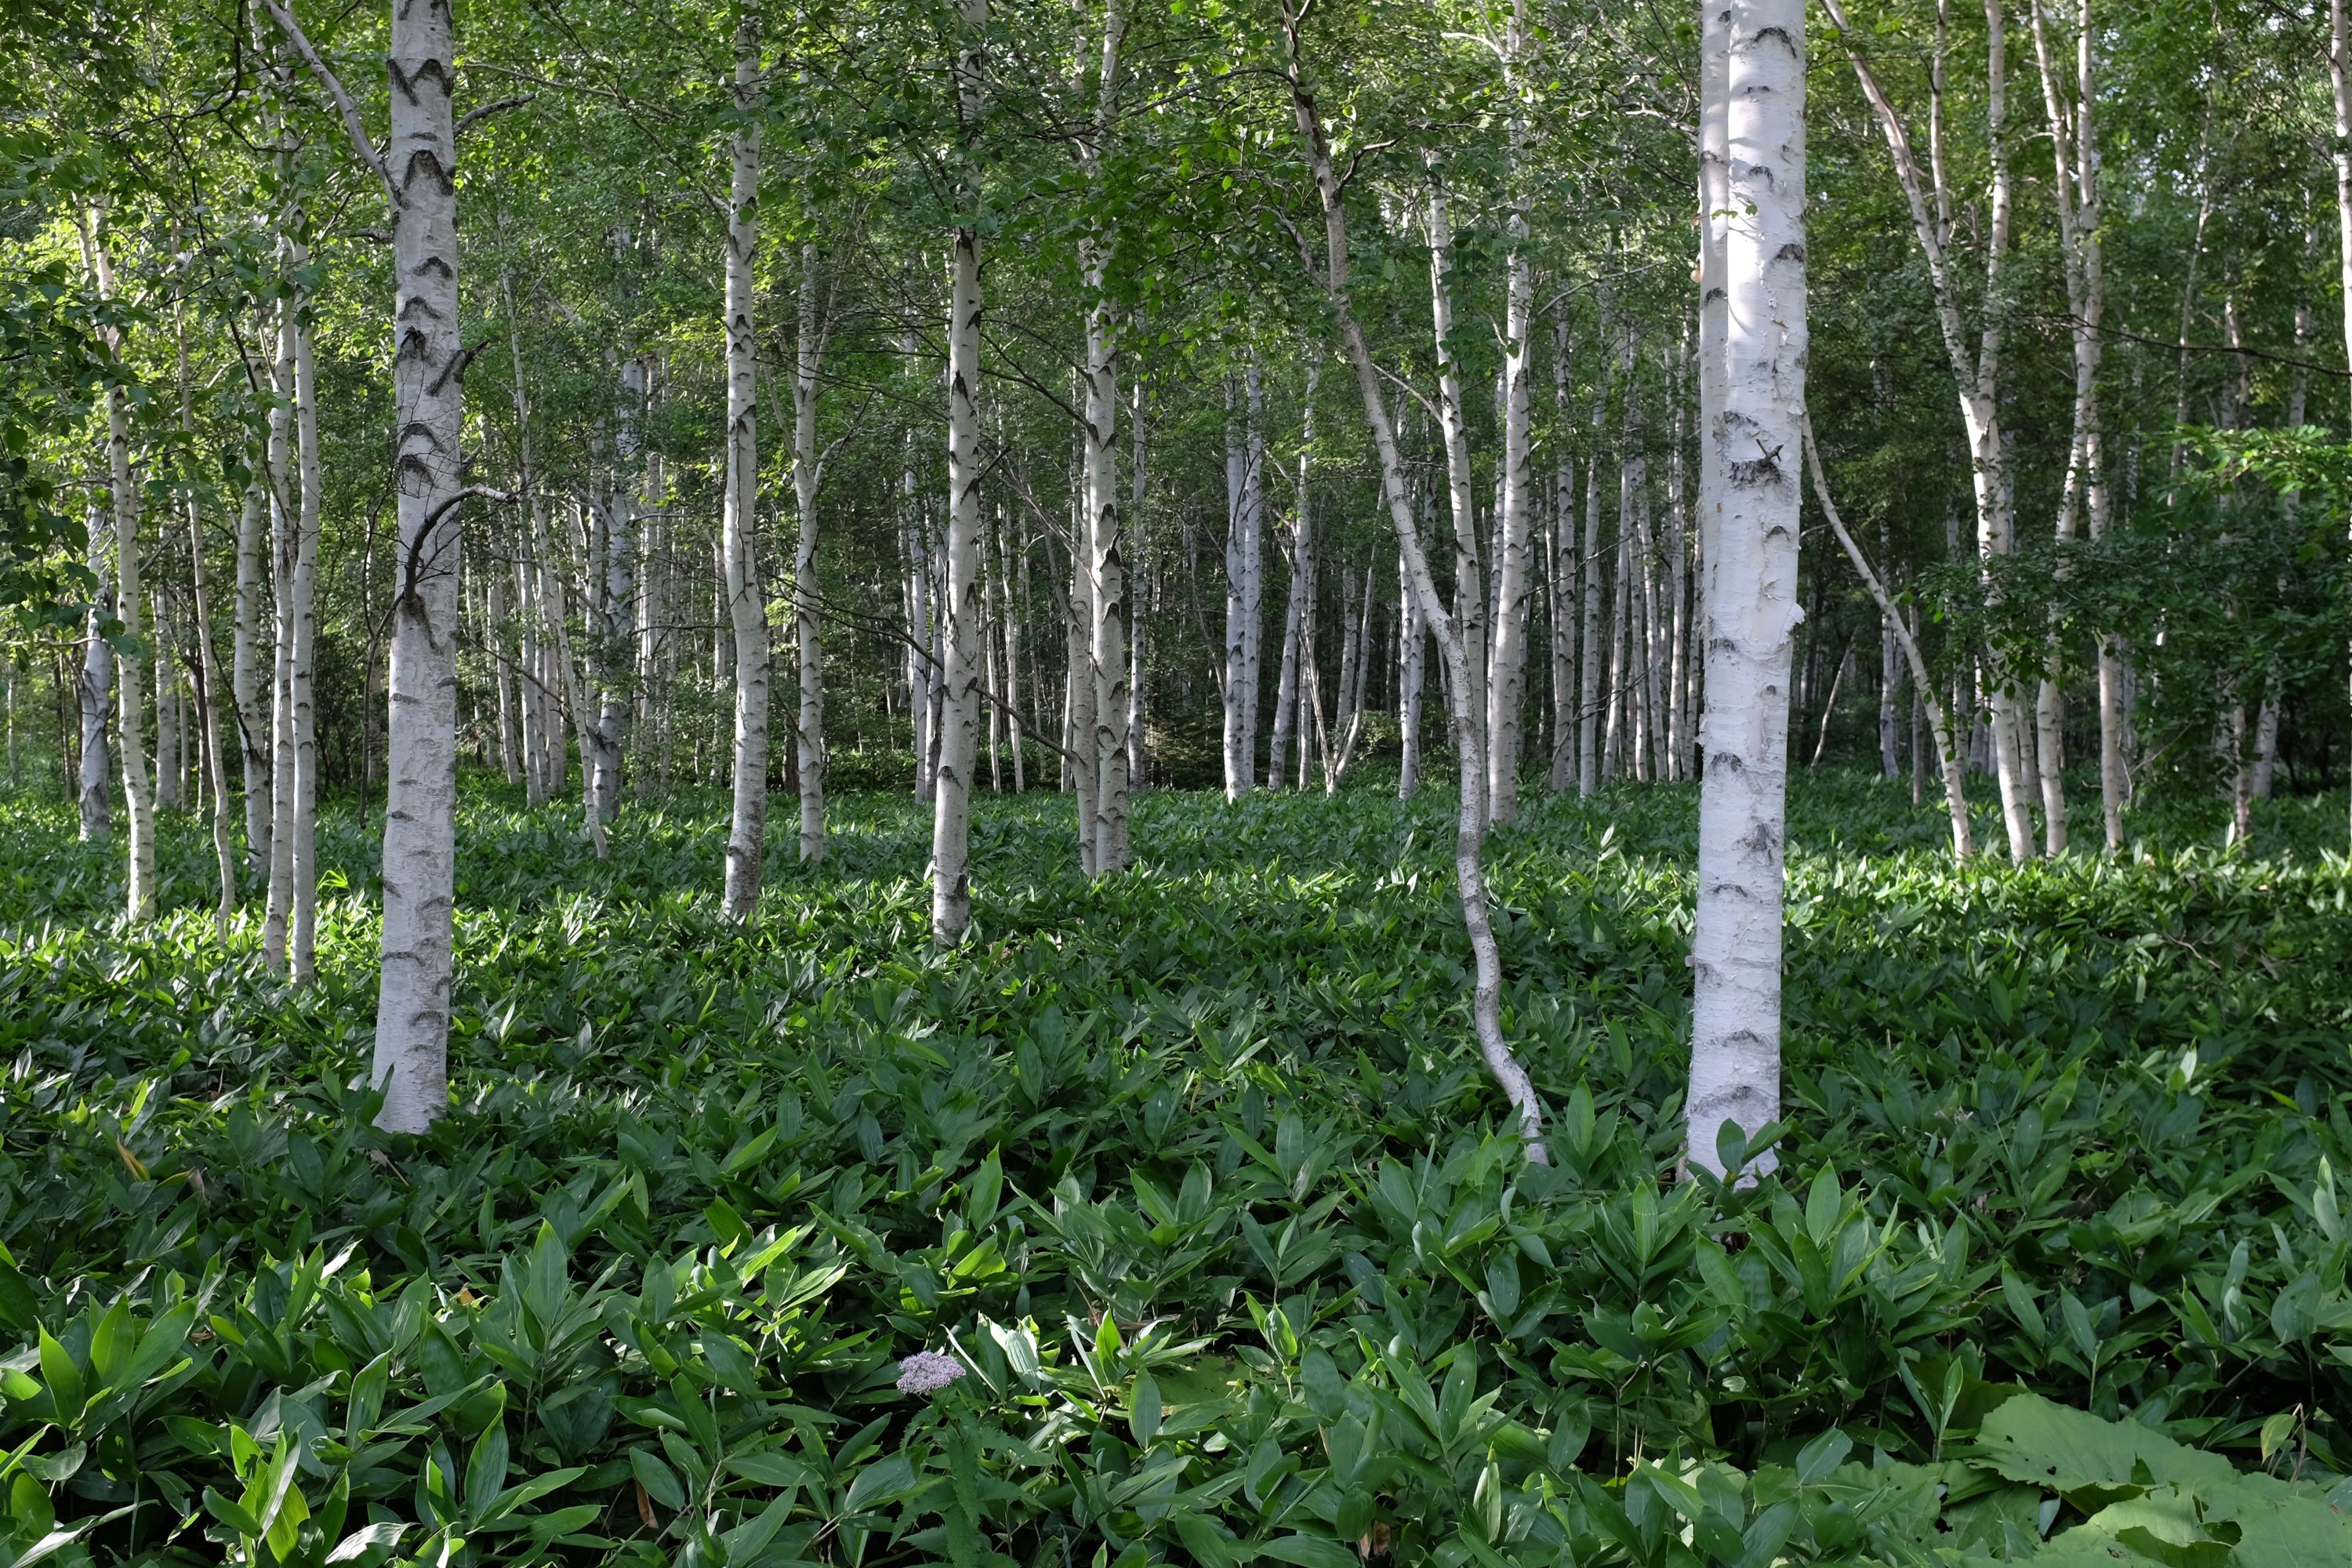 A birch forest with an undergrowth of bamboo grass.